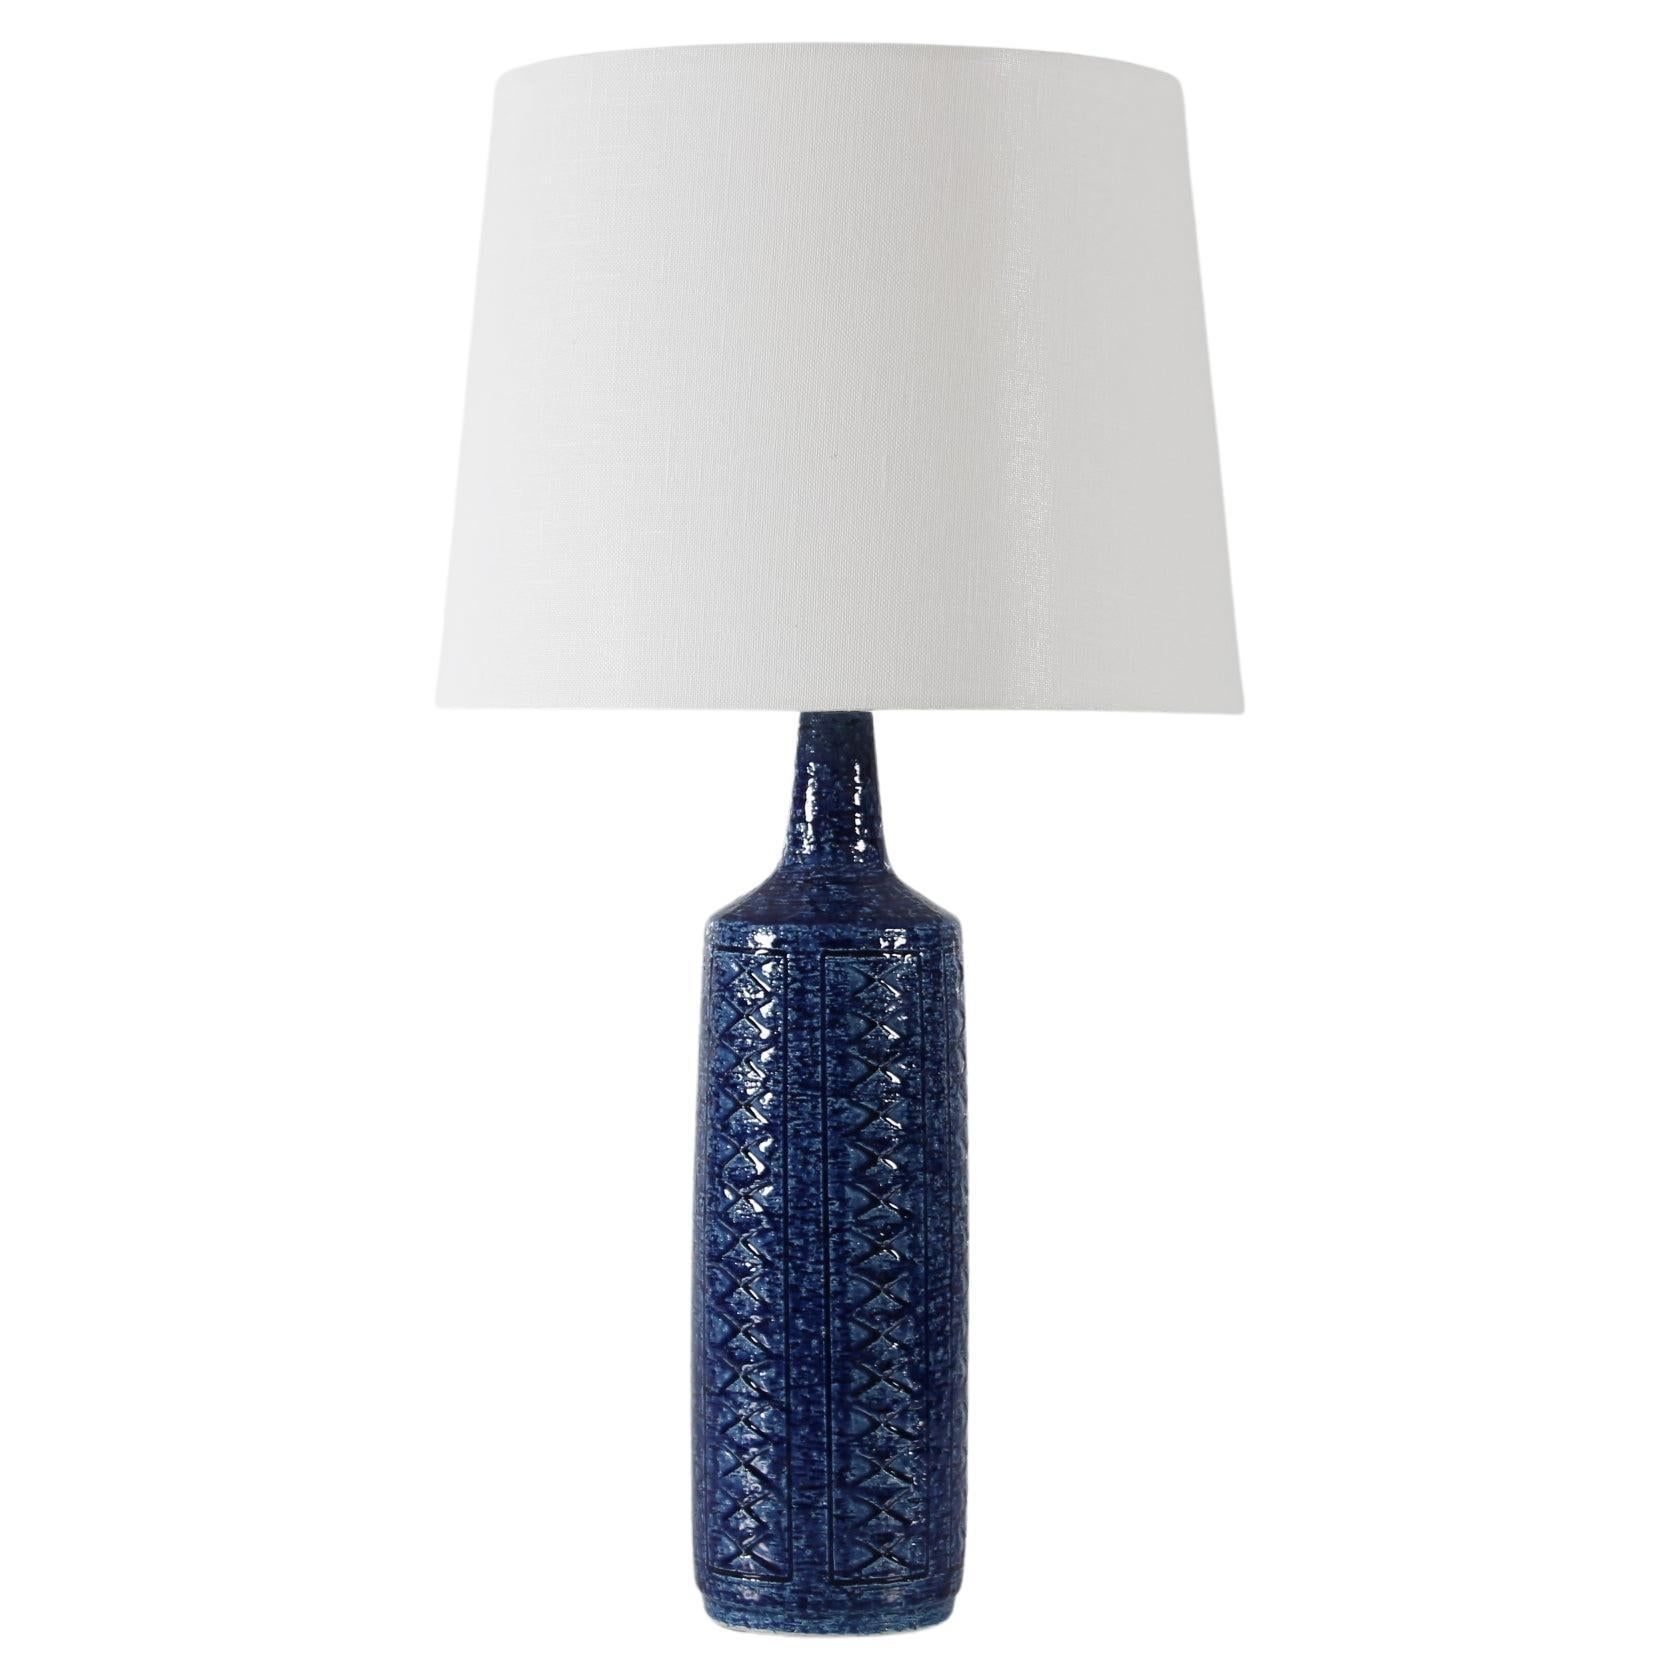 Danish Artistic Palshus Tall Cobalt Blue Table Lamp 1960s with New Lampshade For Sale